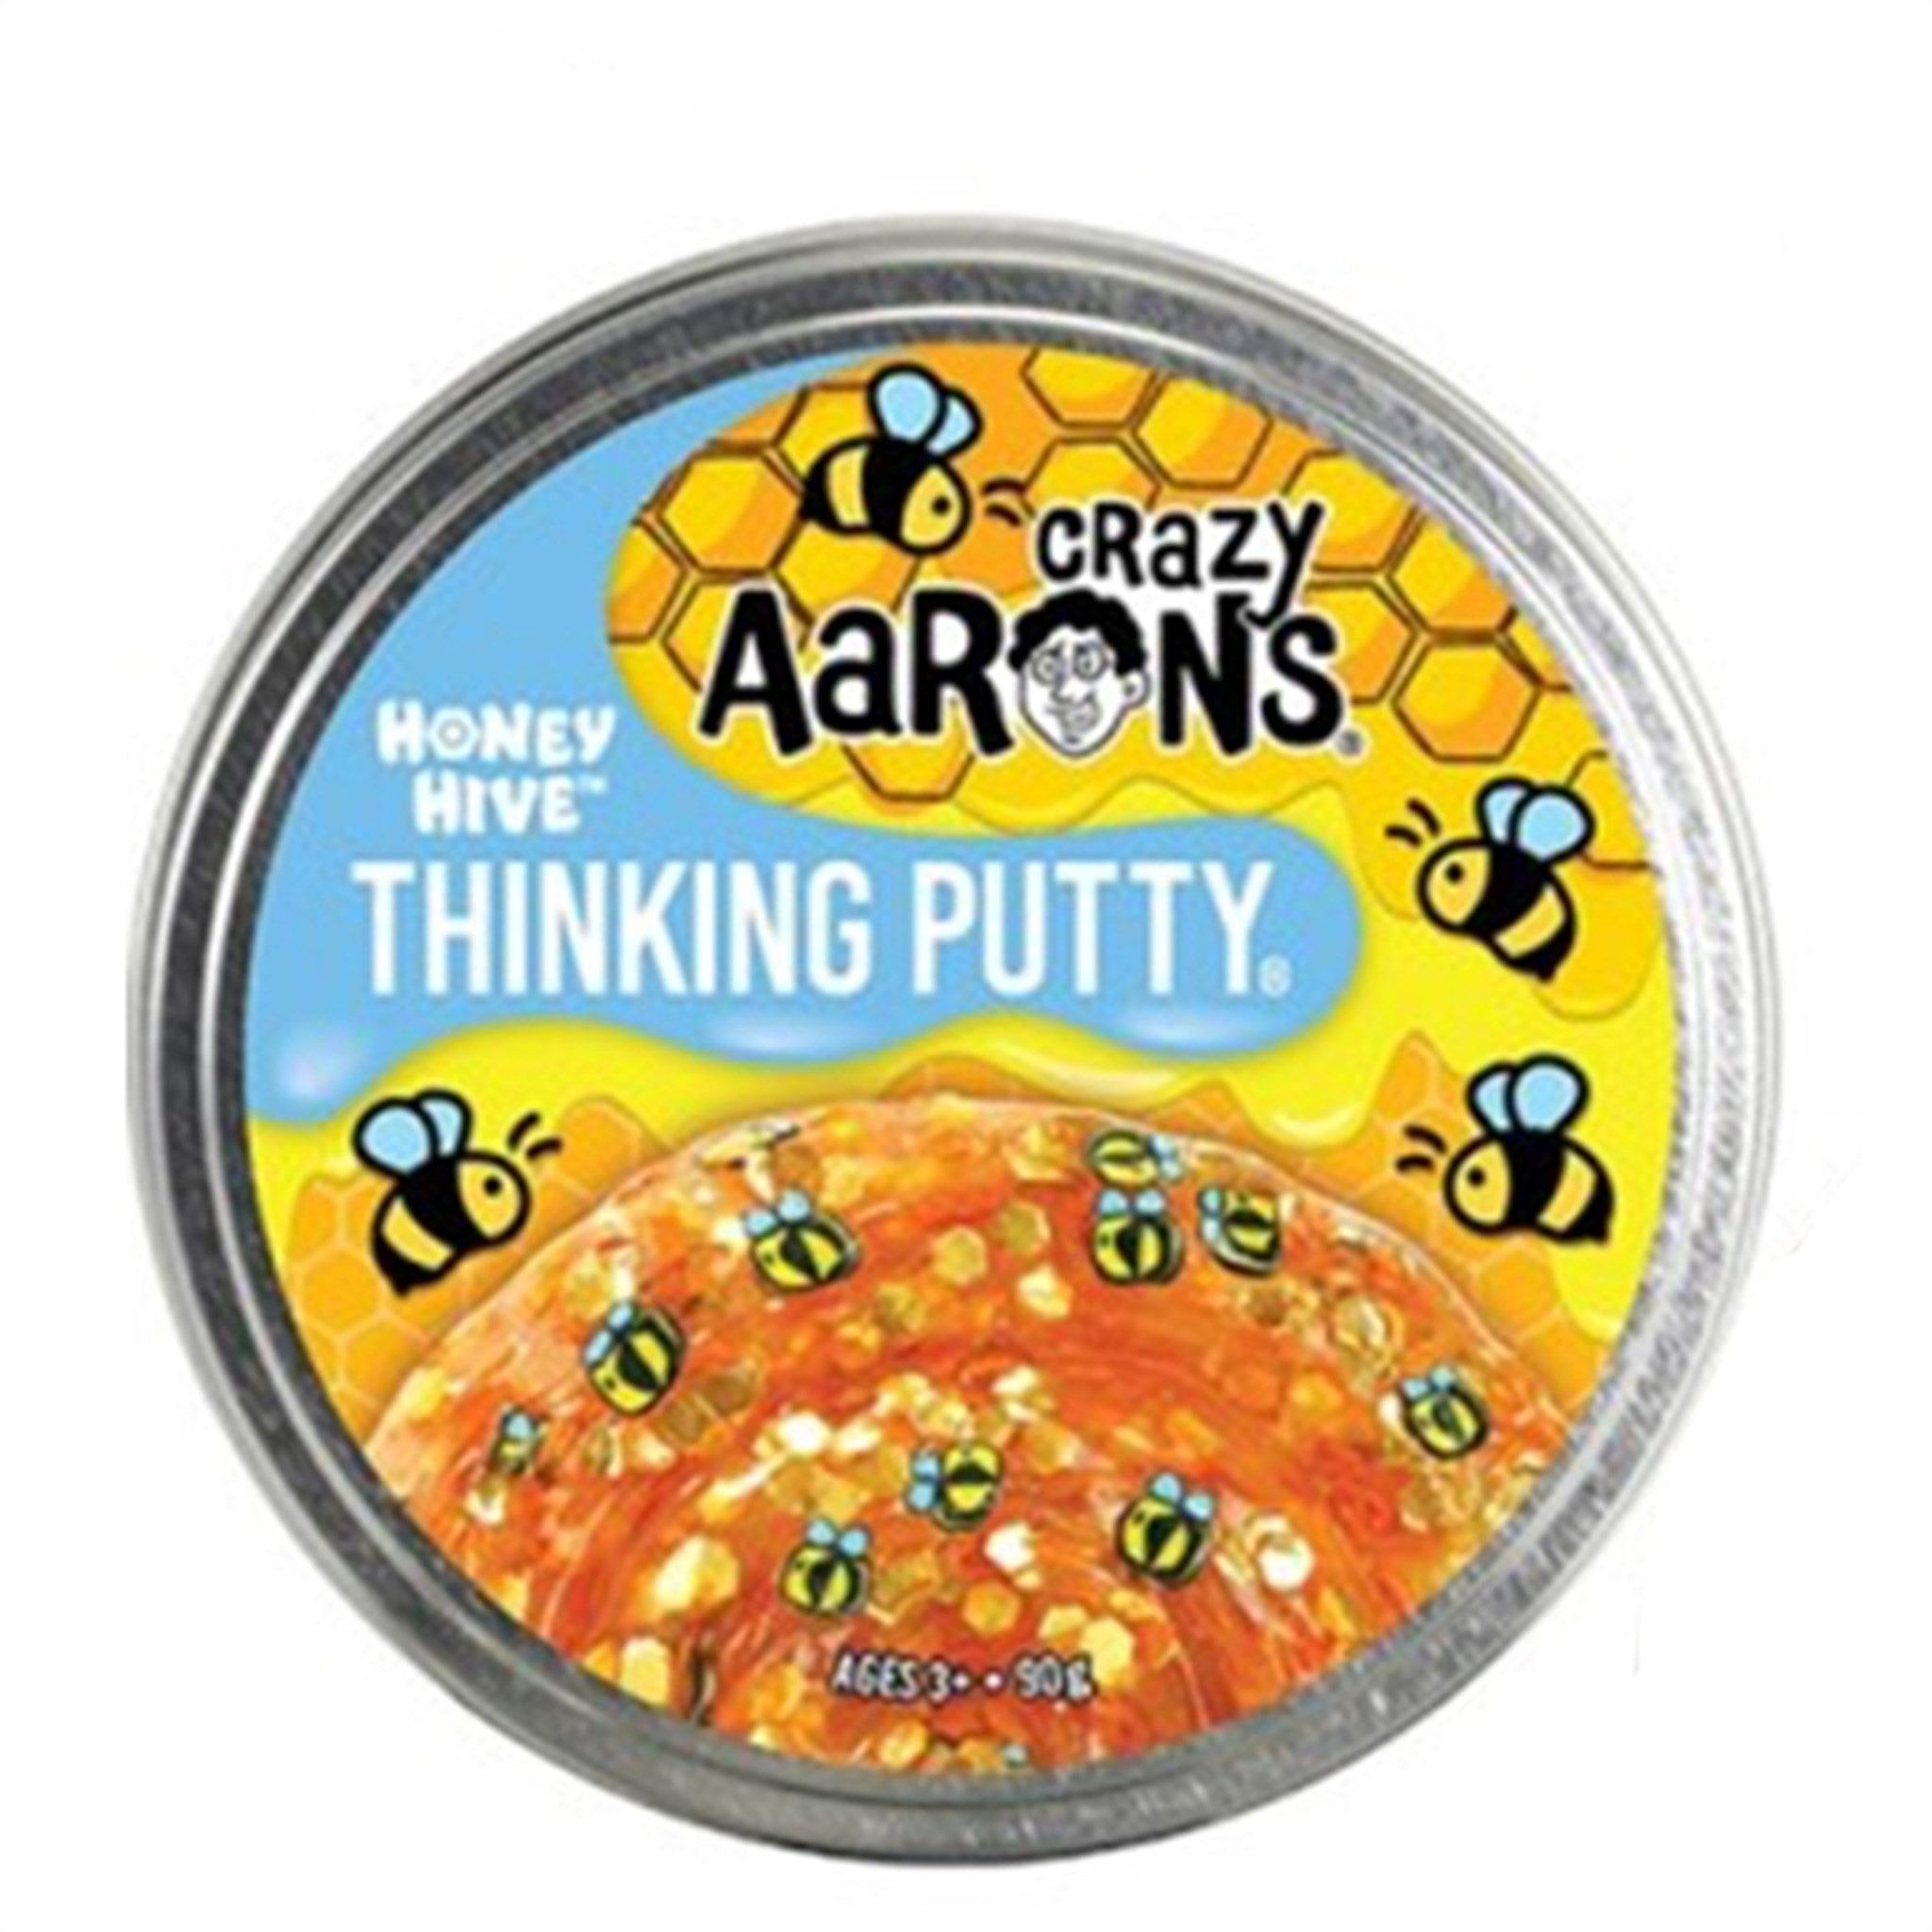 Crazy Aaron's® Thinking Putty Trendsetters - Honey Hive